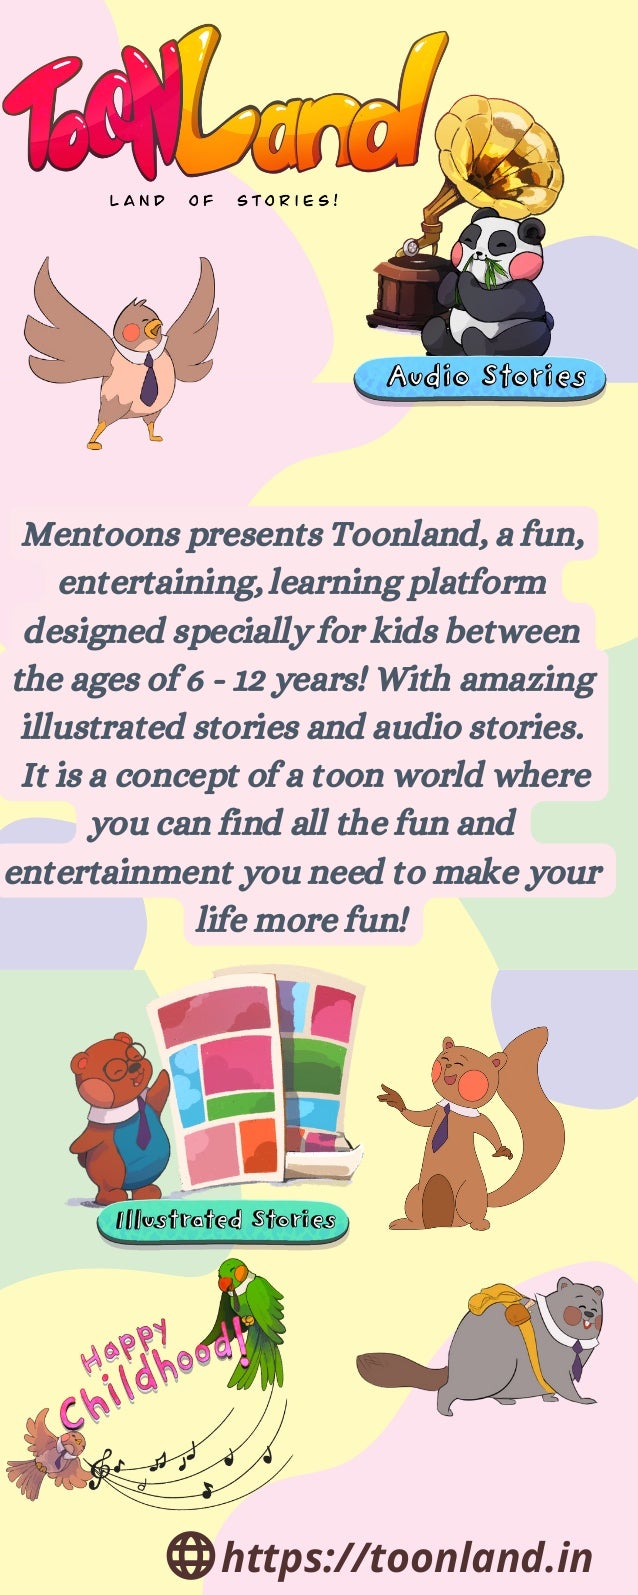 Mentoons presents Toonland, a fun,
entertaining, learning platform
designed specially for kids between
the ages of 6 - 12 years! With amazing
illustrated stories and audio stories.
It is a concept of a toon world where
you can find all the fun and
entertainment you need to make your
life more fun!
https://toonland.in
 